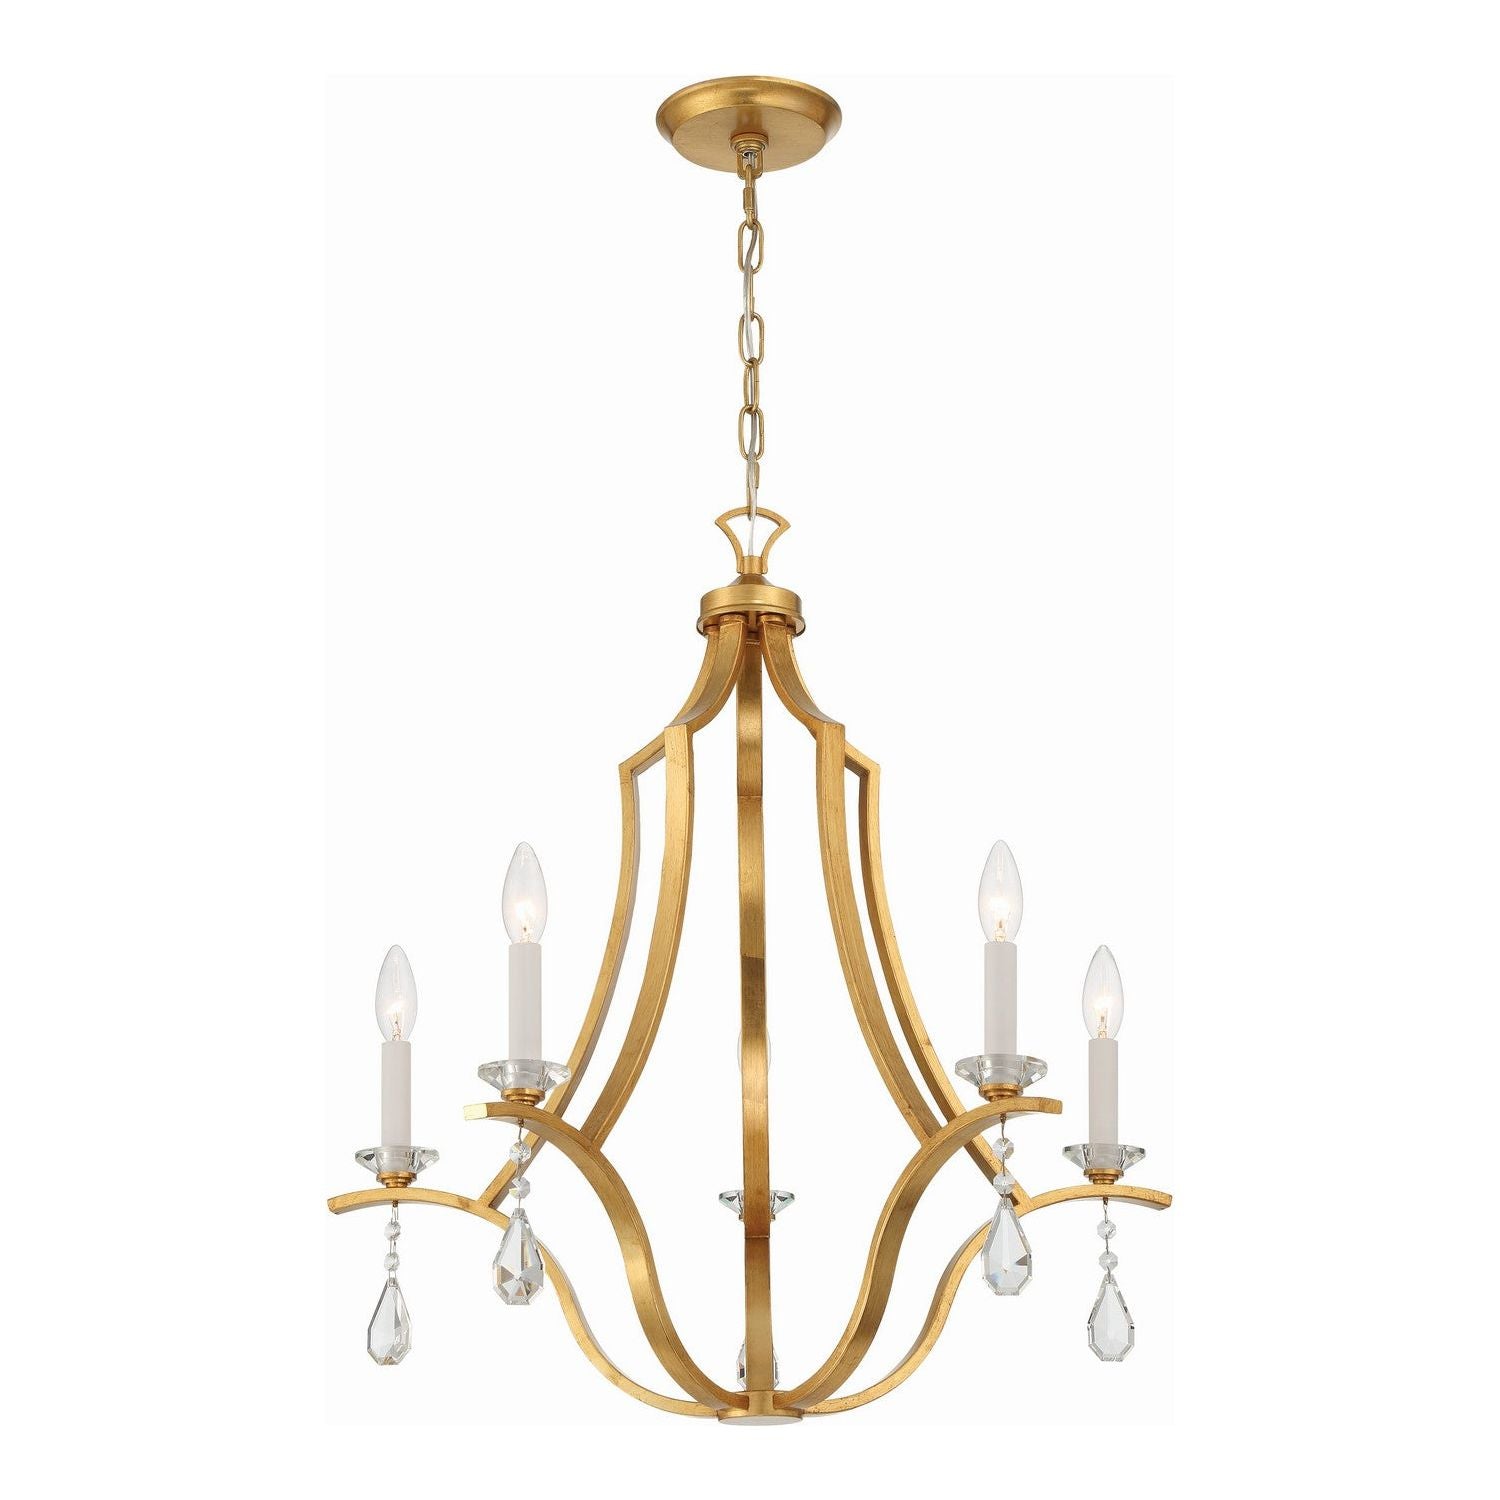 Crystorama - PER-10405-GA - Five Light Chandelier - Perry - Antique Gold